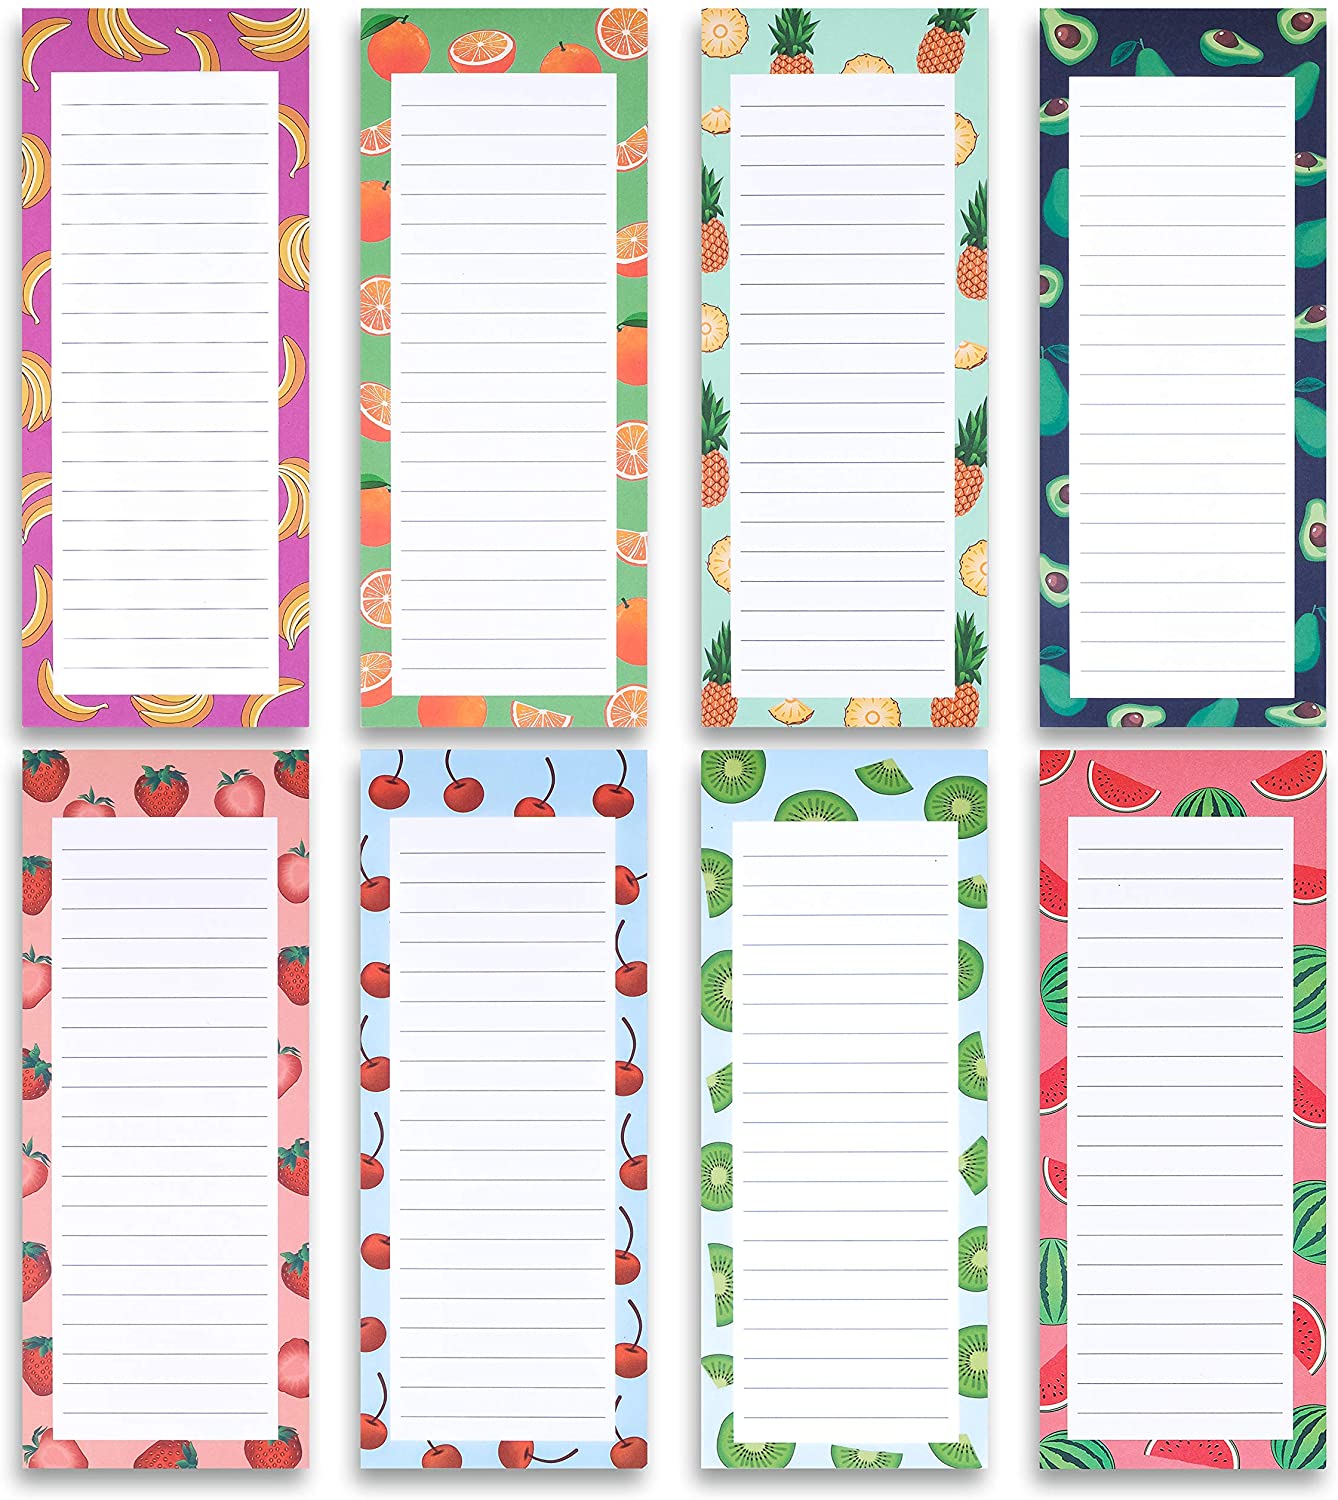 Pipilo Press 52 Sheets Weekly To Do List Pad For Planning, Planner